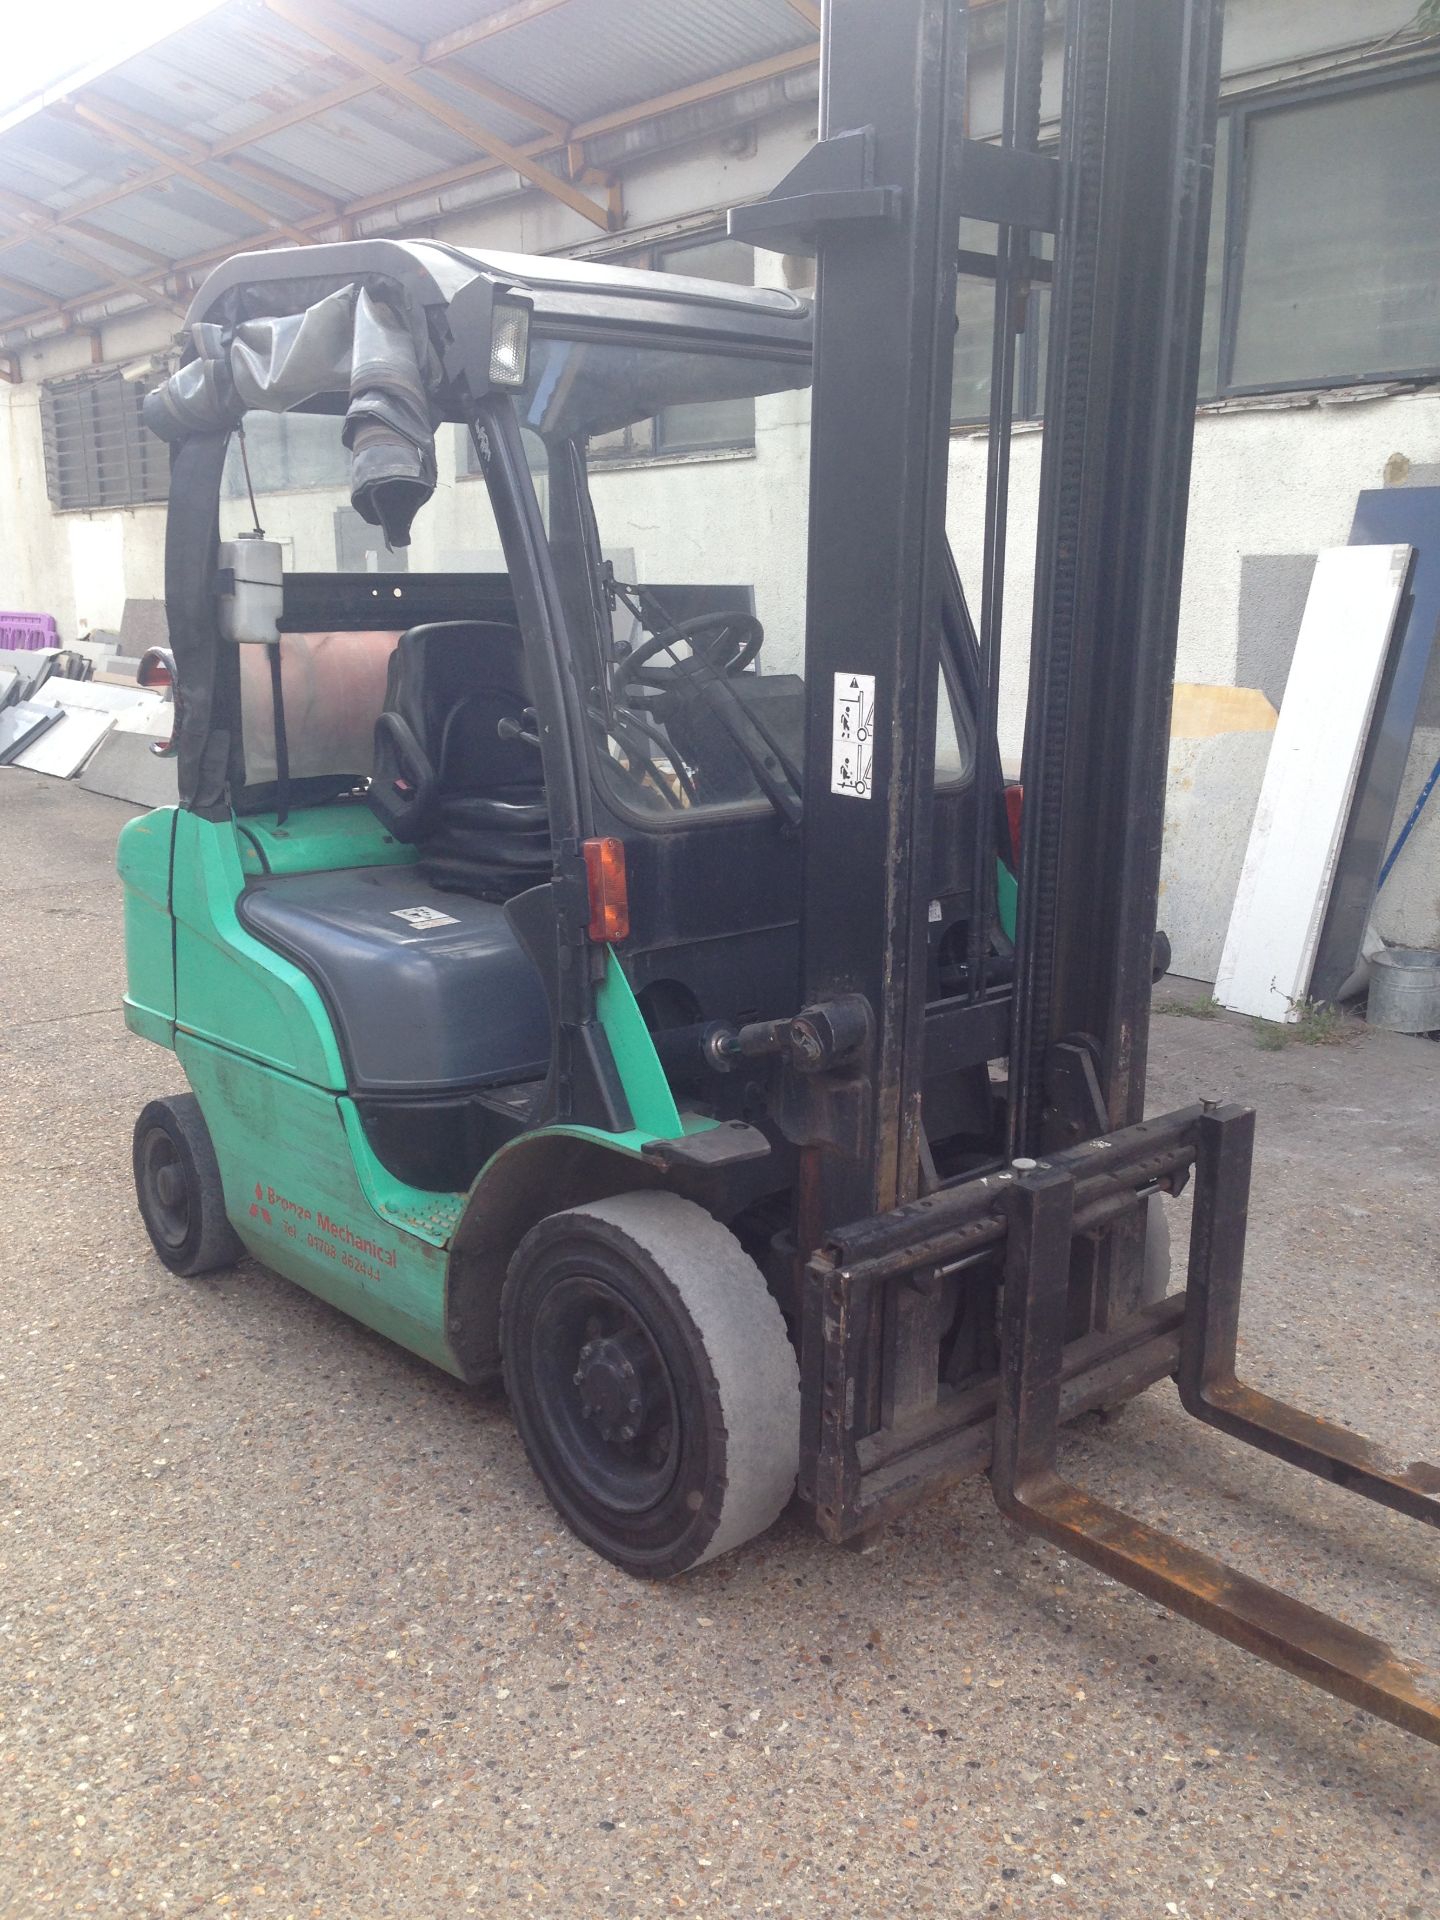 Caterpillar GP20N Counterbalance Gas Forklift Truck - Image 2 of 6